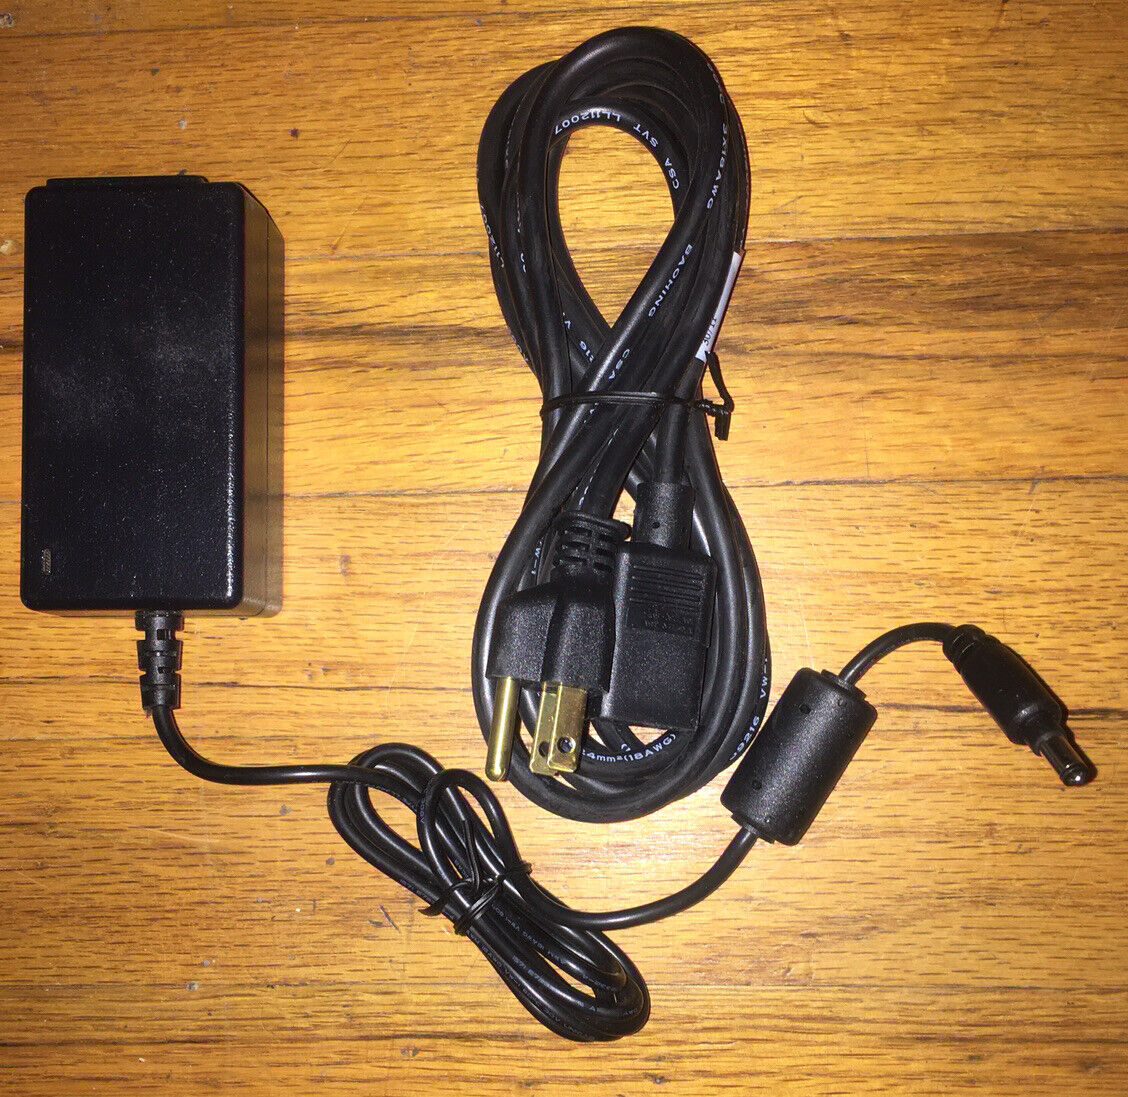 AVOCENT Power supply - optional external power supply for HMIQSHDI and HMIQDHDD 